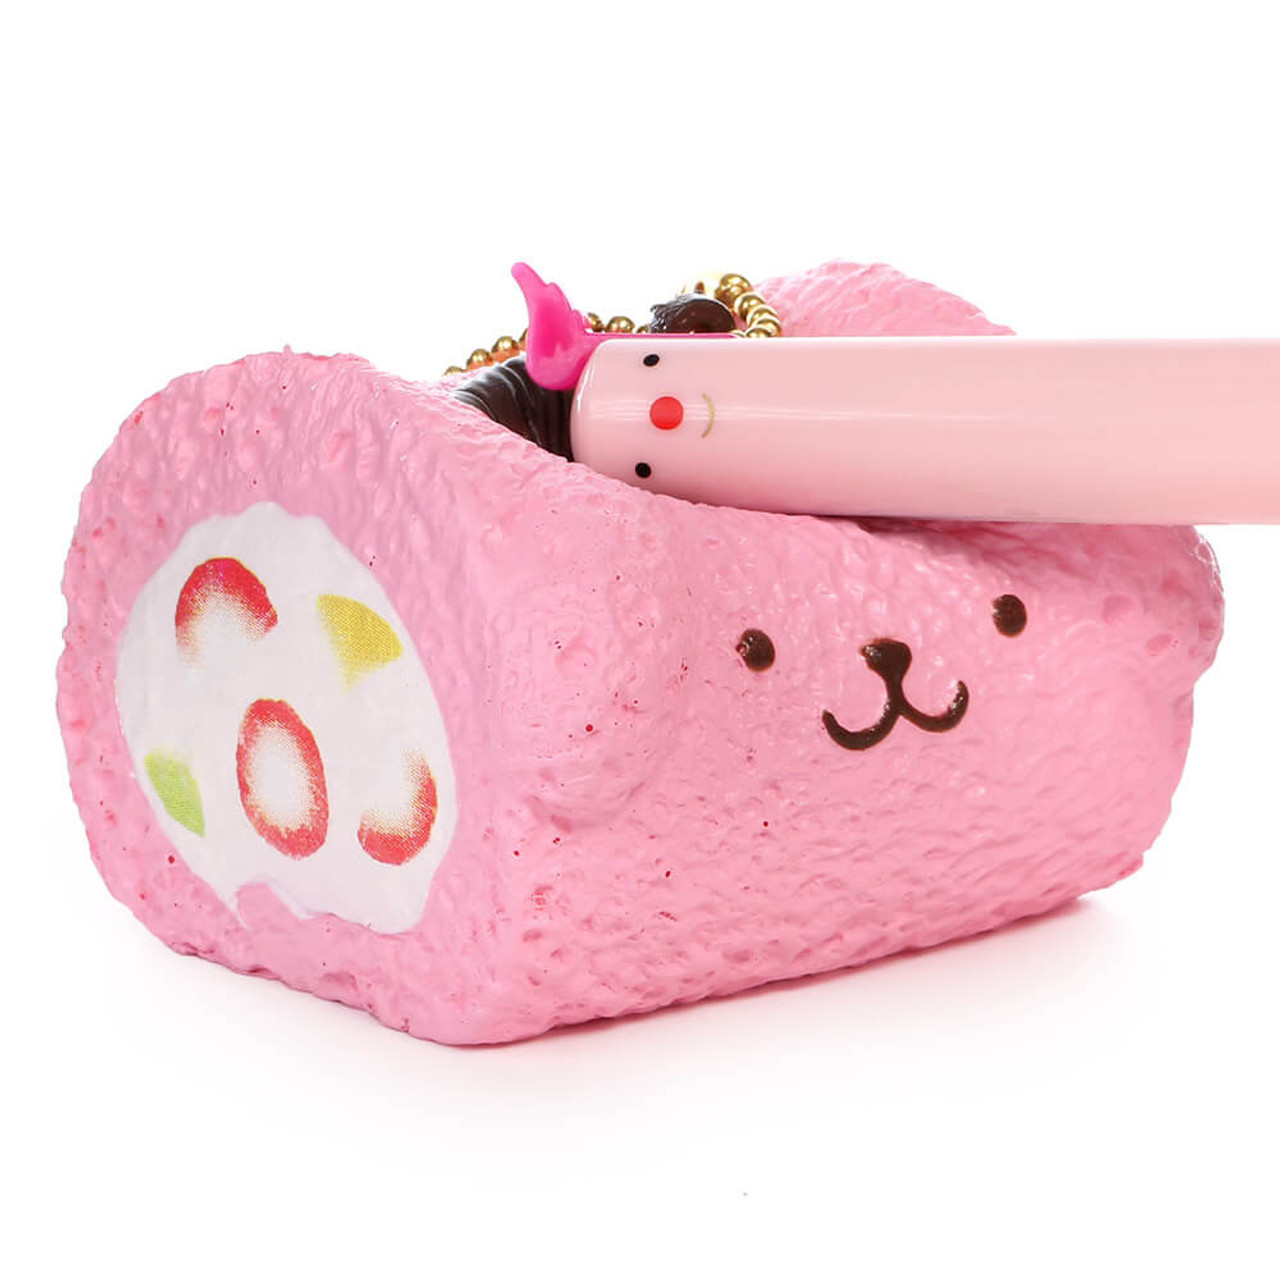 Sanrio Pompompurin Strawberry Roll Cake Squishy Charm - Pink ( Proportion & Squeezing Mode )